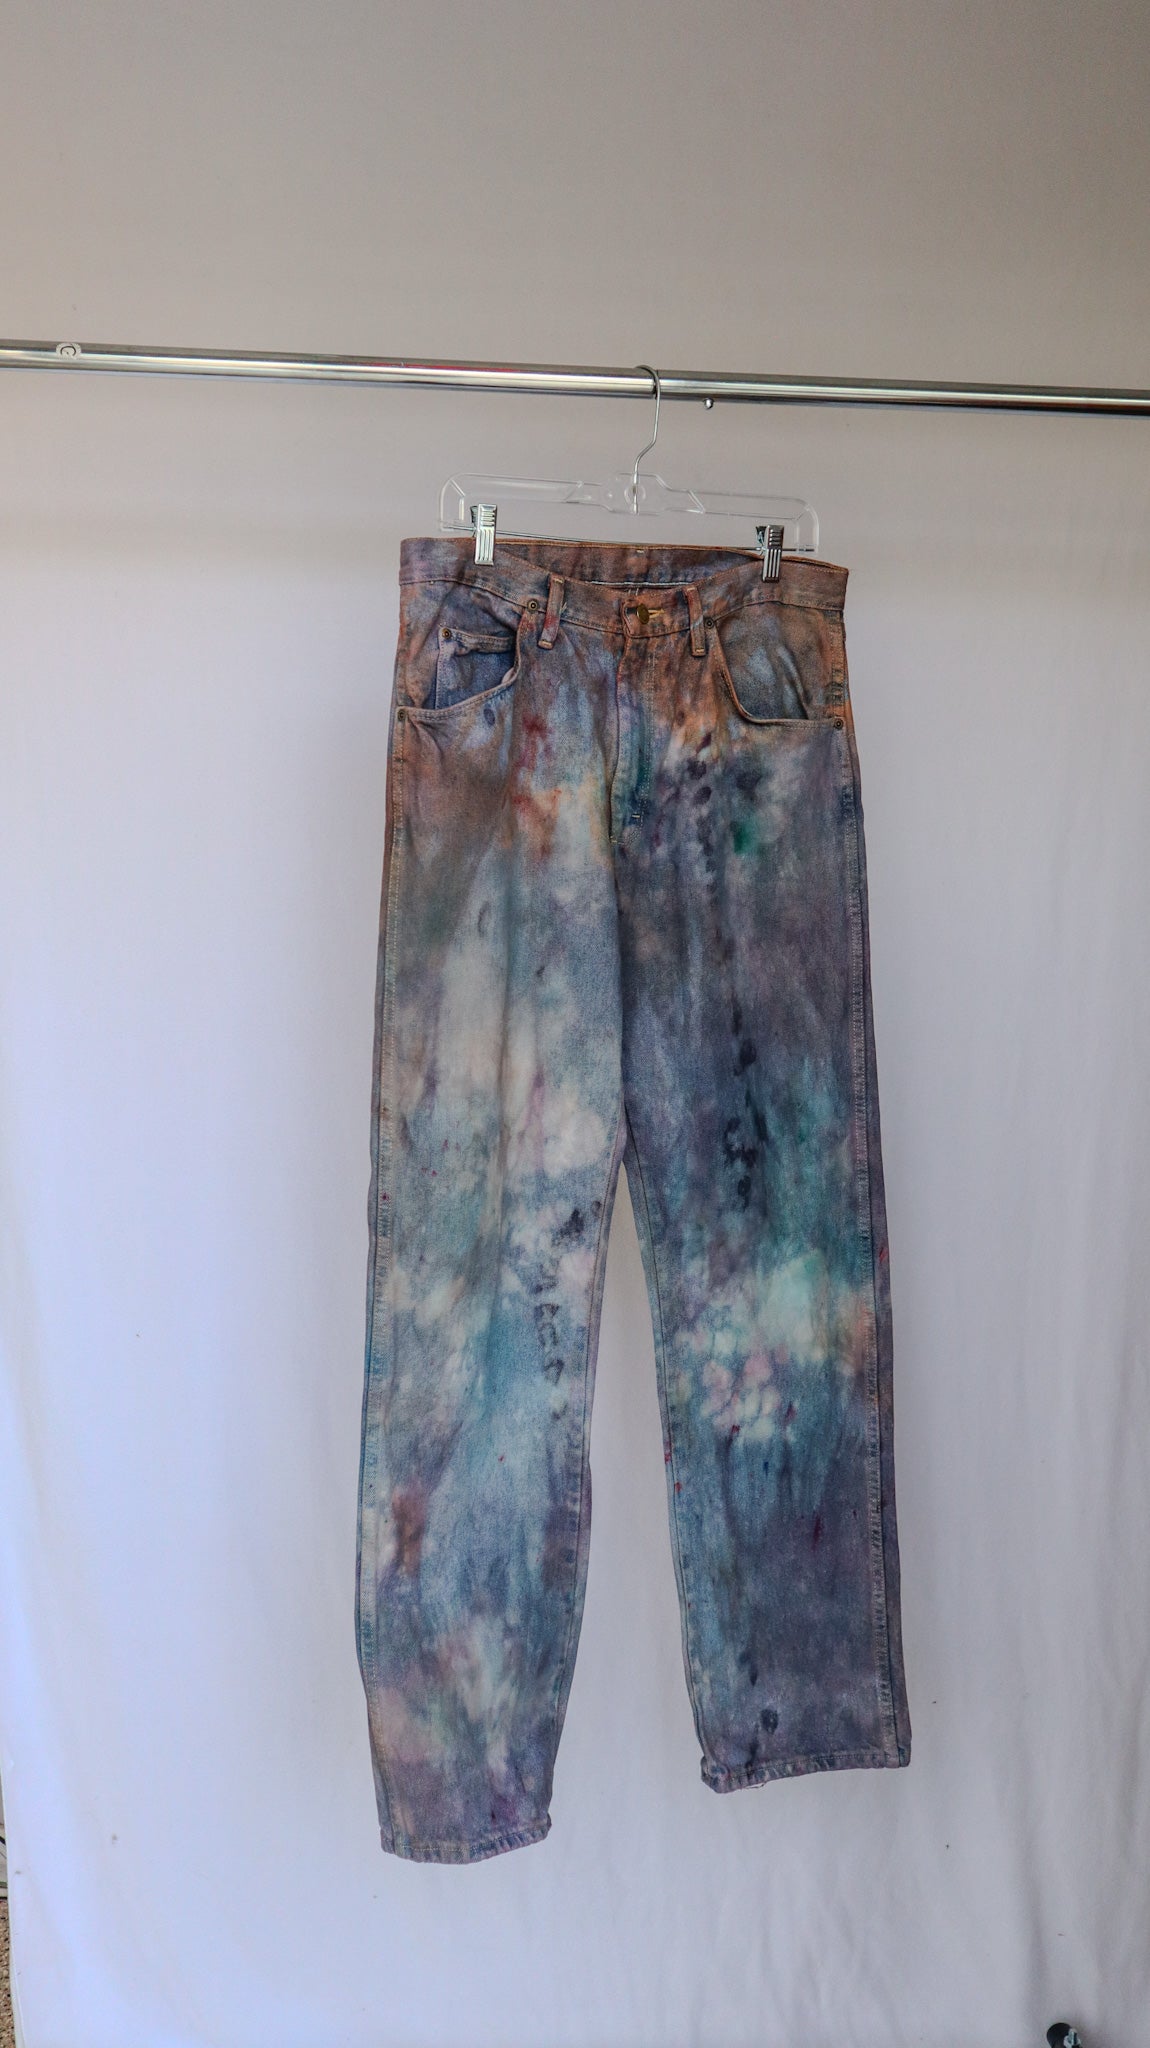 1 OF 1 CUSTOM DYED JEANS